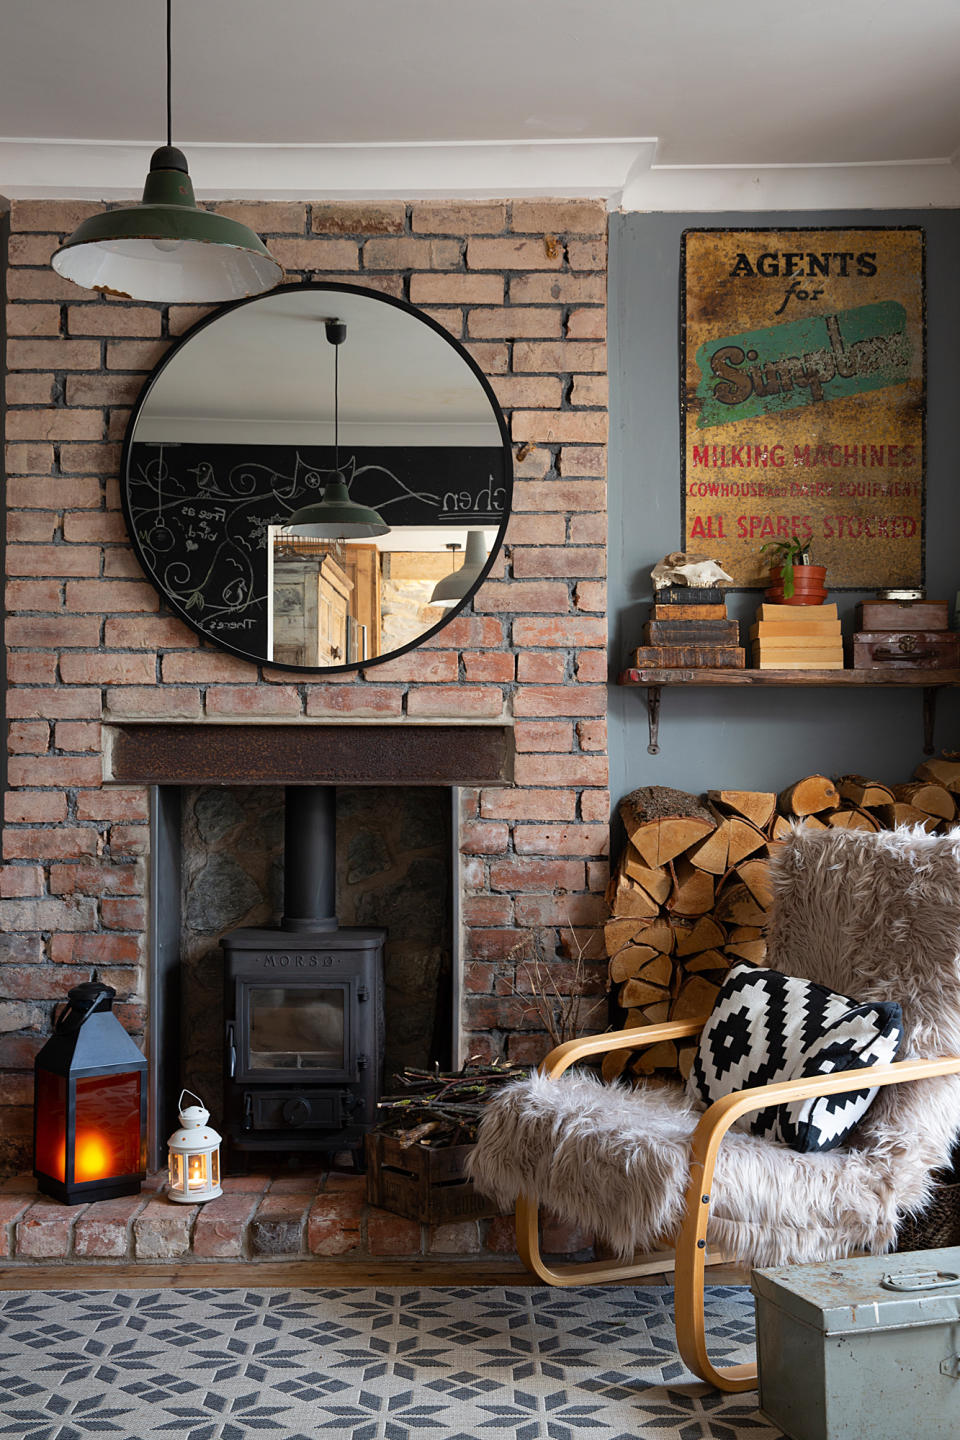 <p> You can DIY an exposed brick wall if have the right setup to do so in your home. But if you&apos;re not lucky enough to have an exposed brick wall in your man cave, then create the illusion with brick-effect wallpaper.&#xA0; </p> <p> For a similar look, try Brick wall wallpaper in old-style from Rebel Walls. </p>